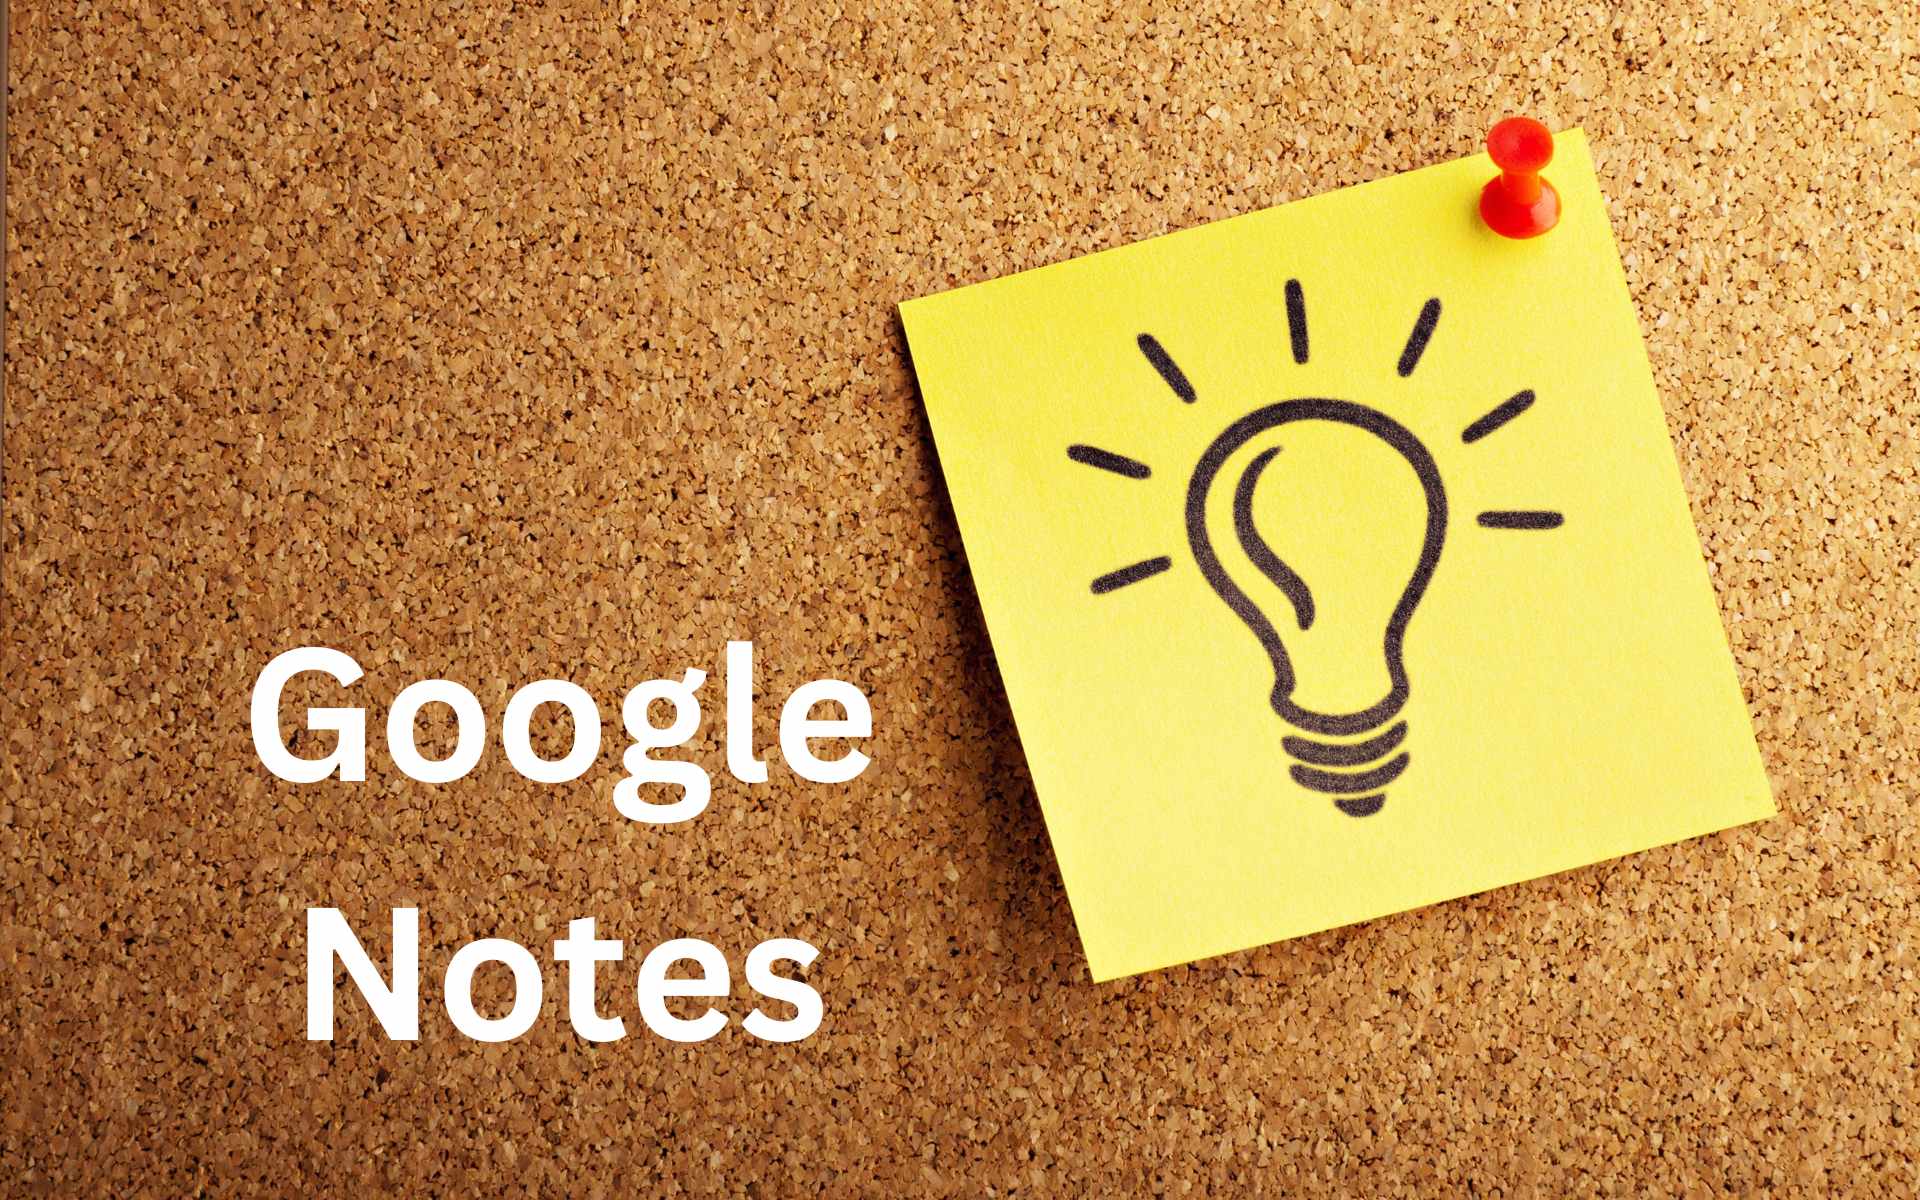 Google Notes in India